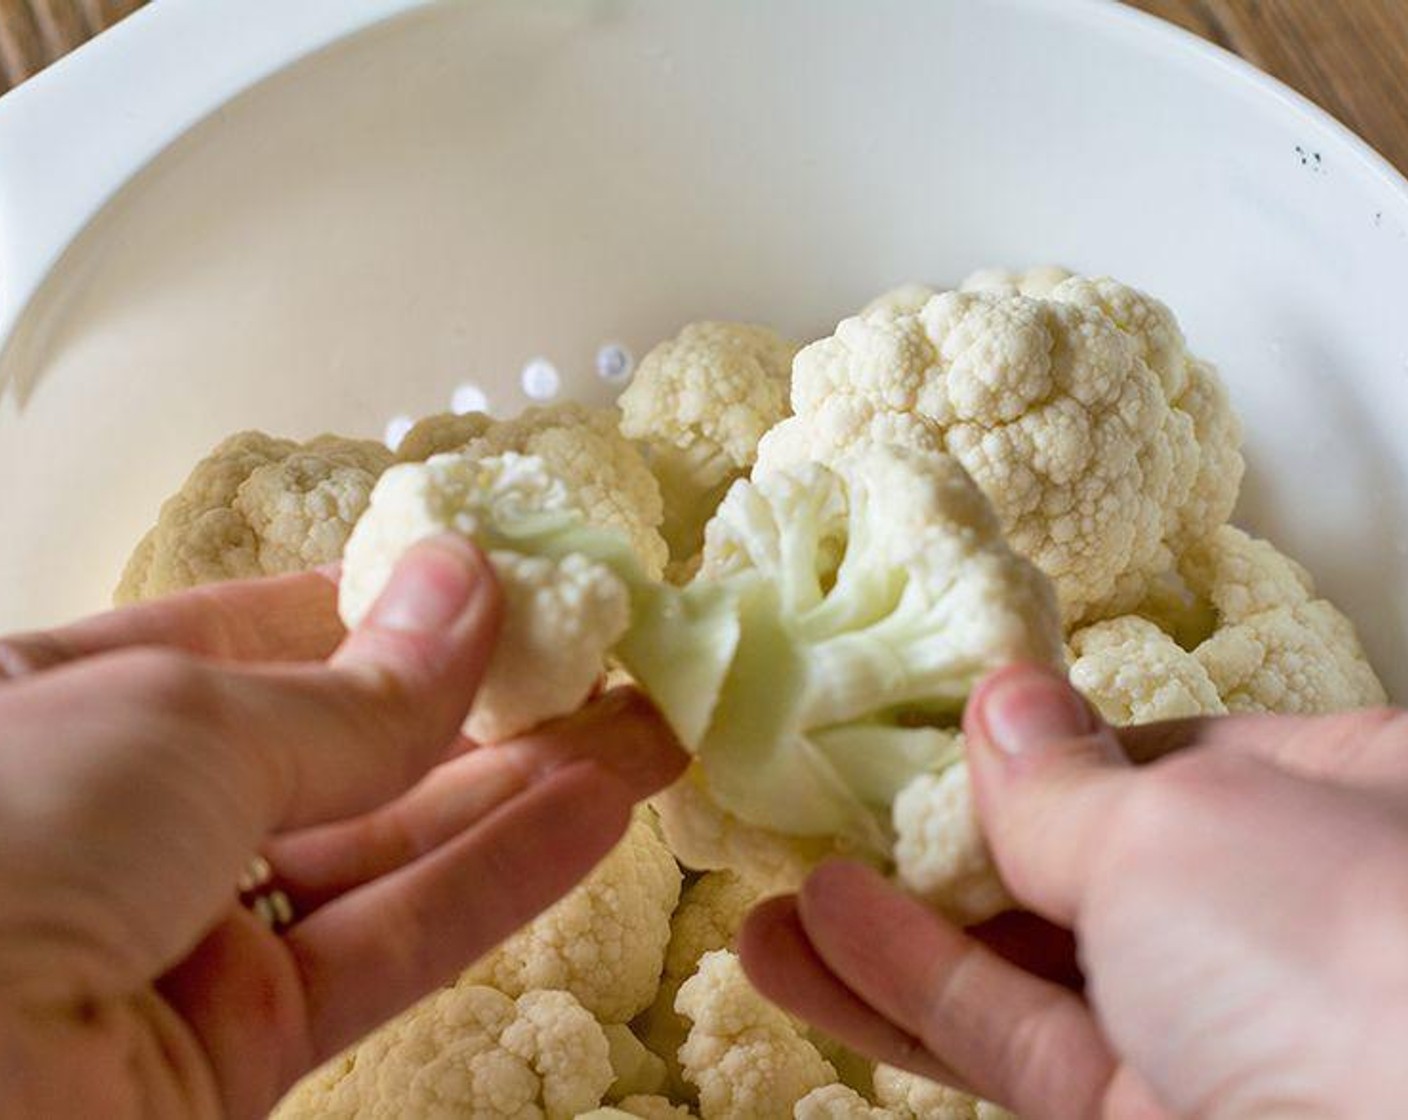 step 2 Add Cauliflower Florets (4 cups) in a large pot and cover with water. Bring to a low boil. Once boiling, cook for 5-6 minutes until tender. Drain water and set aside.